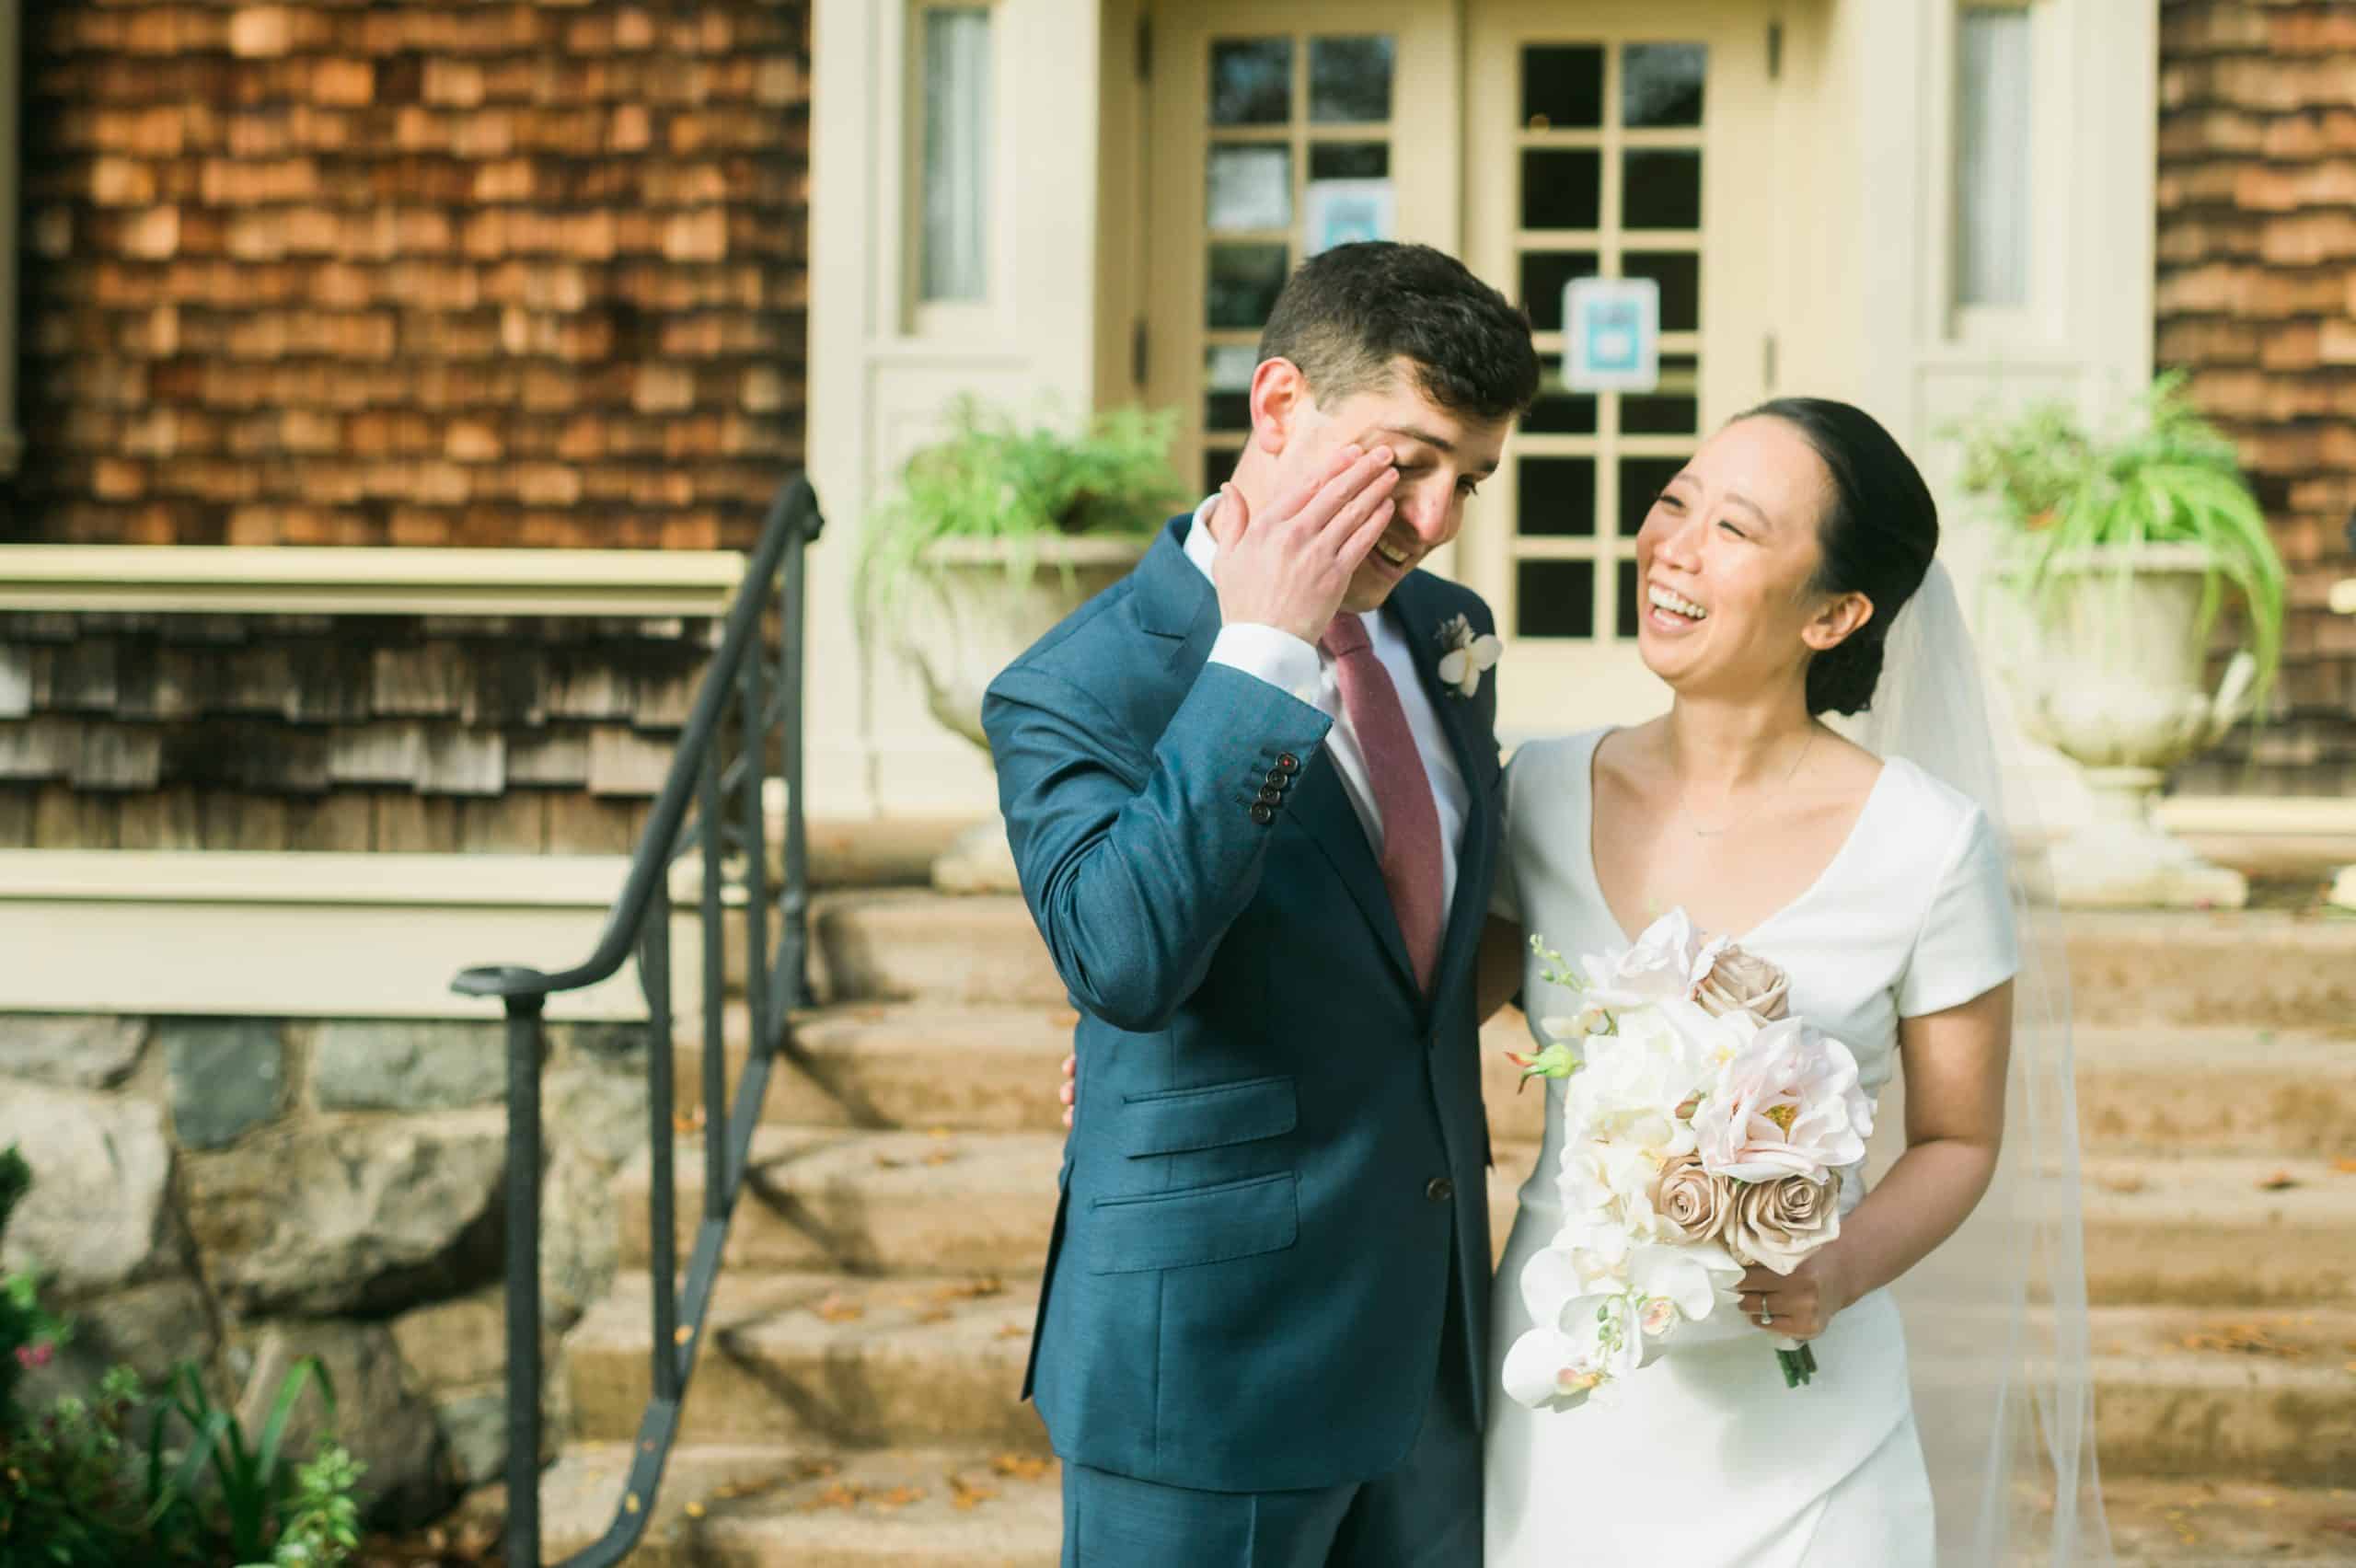 COVID19 Intimate micro-wedding at Reeves Reed Arboretum with Ketubah signing and Chinese tea ceremony, captured by fun, candid, documentary NJ wedding photographer Ben Lau.